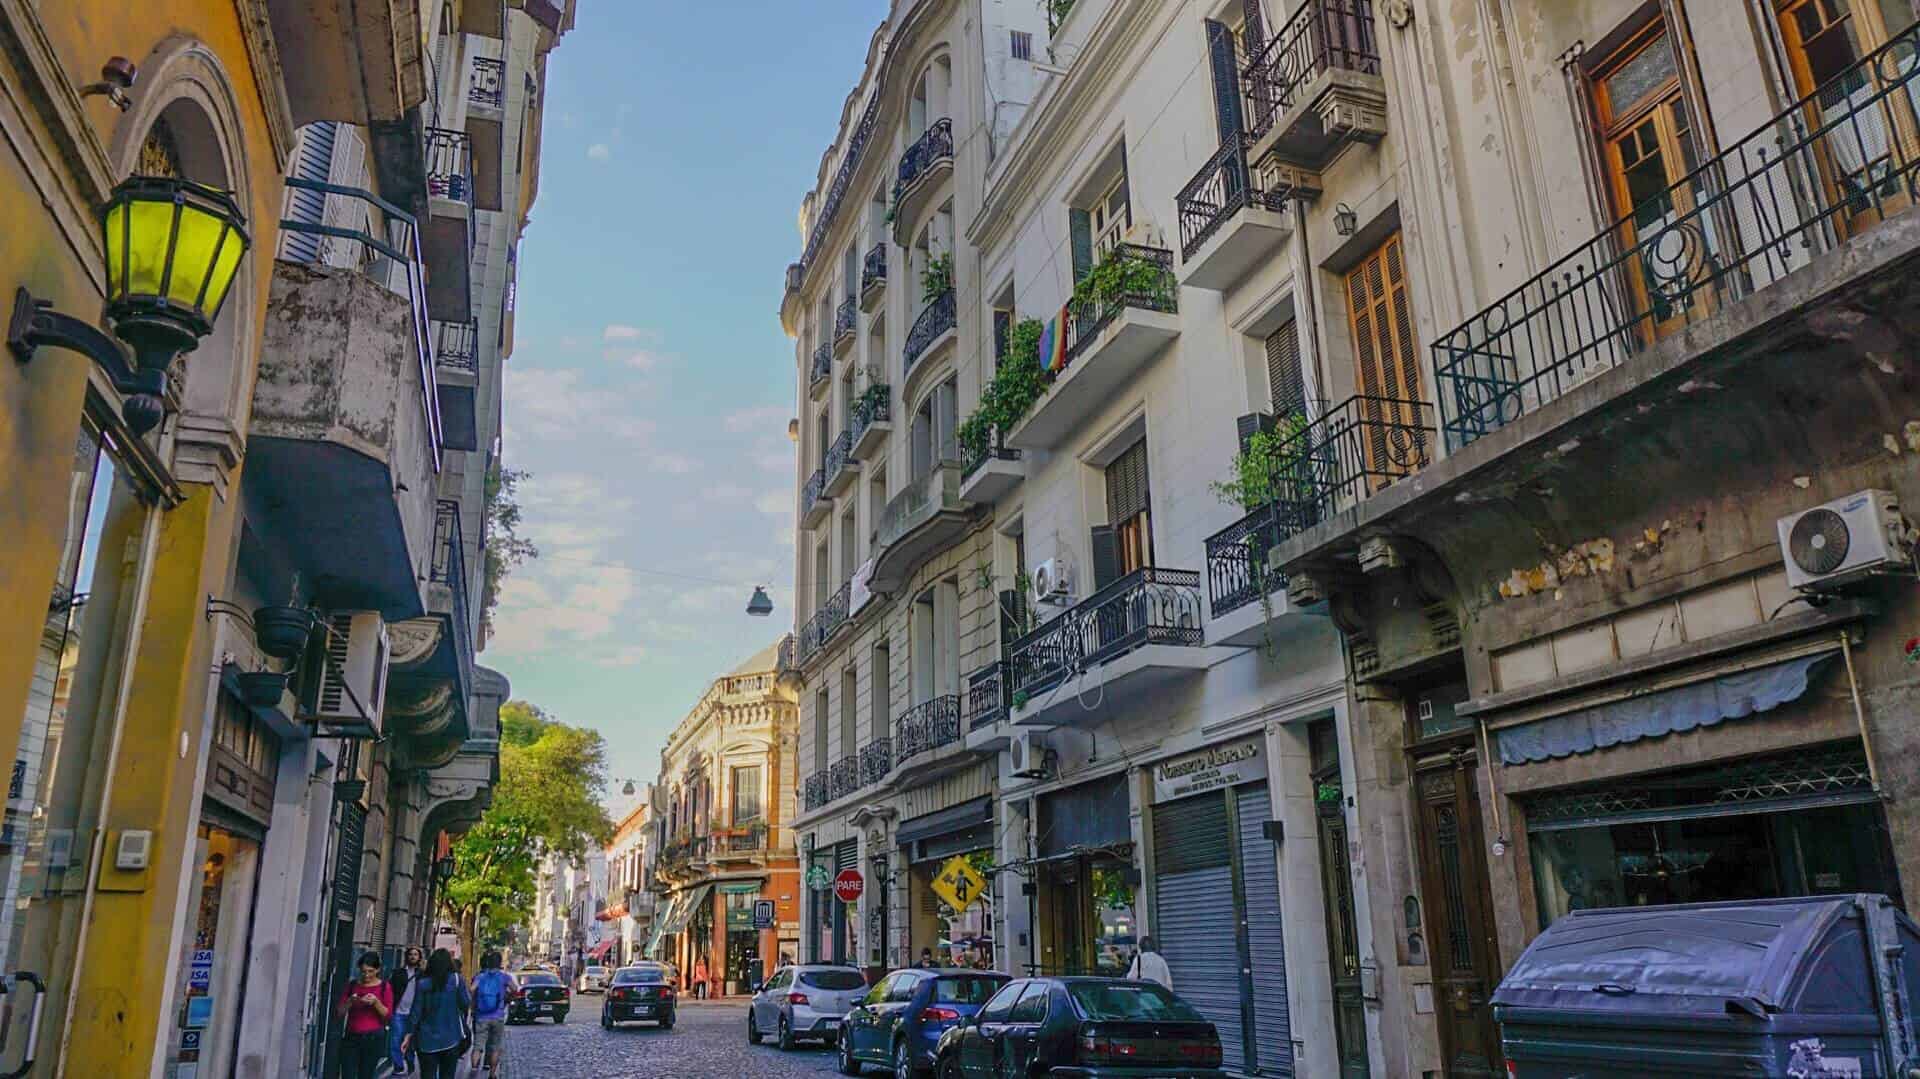 San Telmo, one of the many neighbourhoods of Buenos Aires